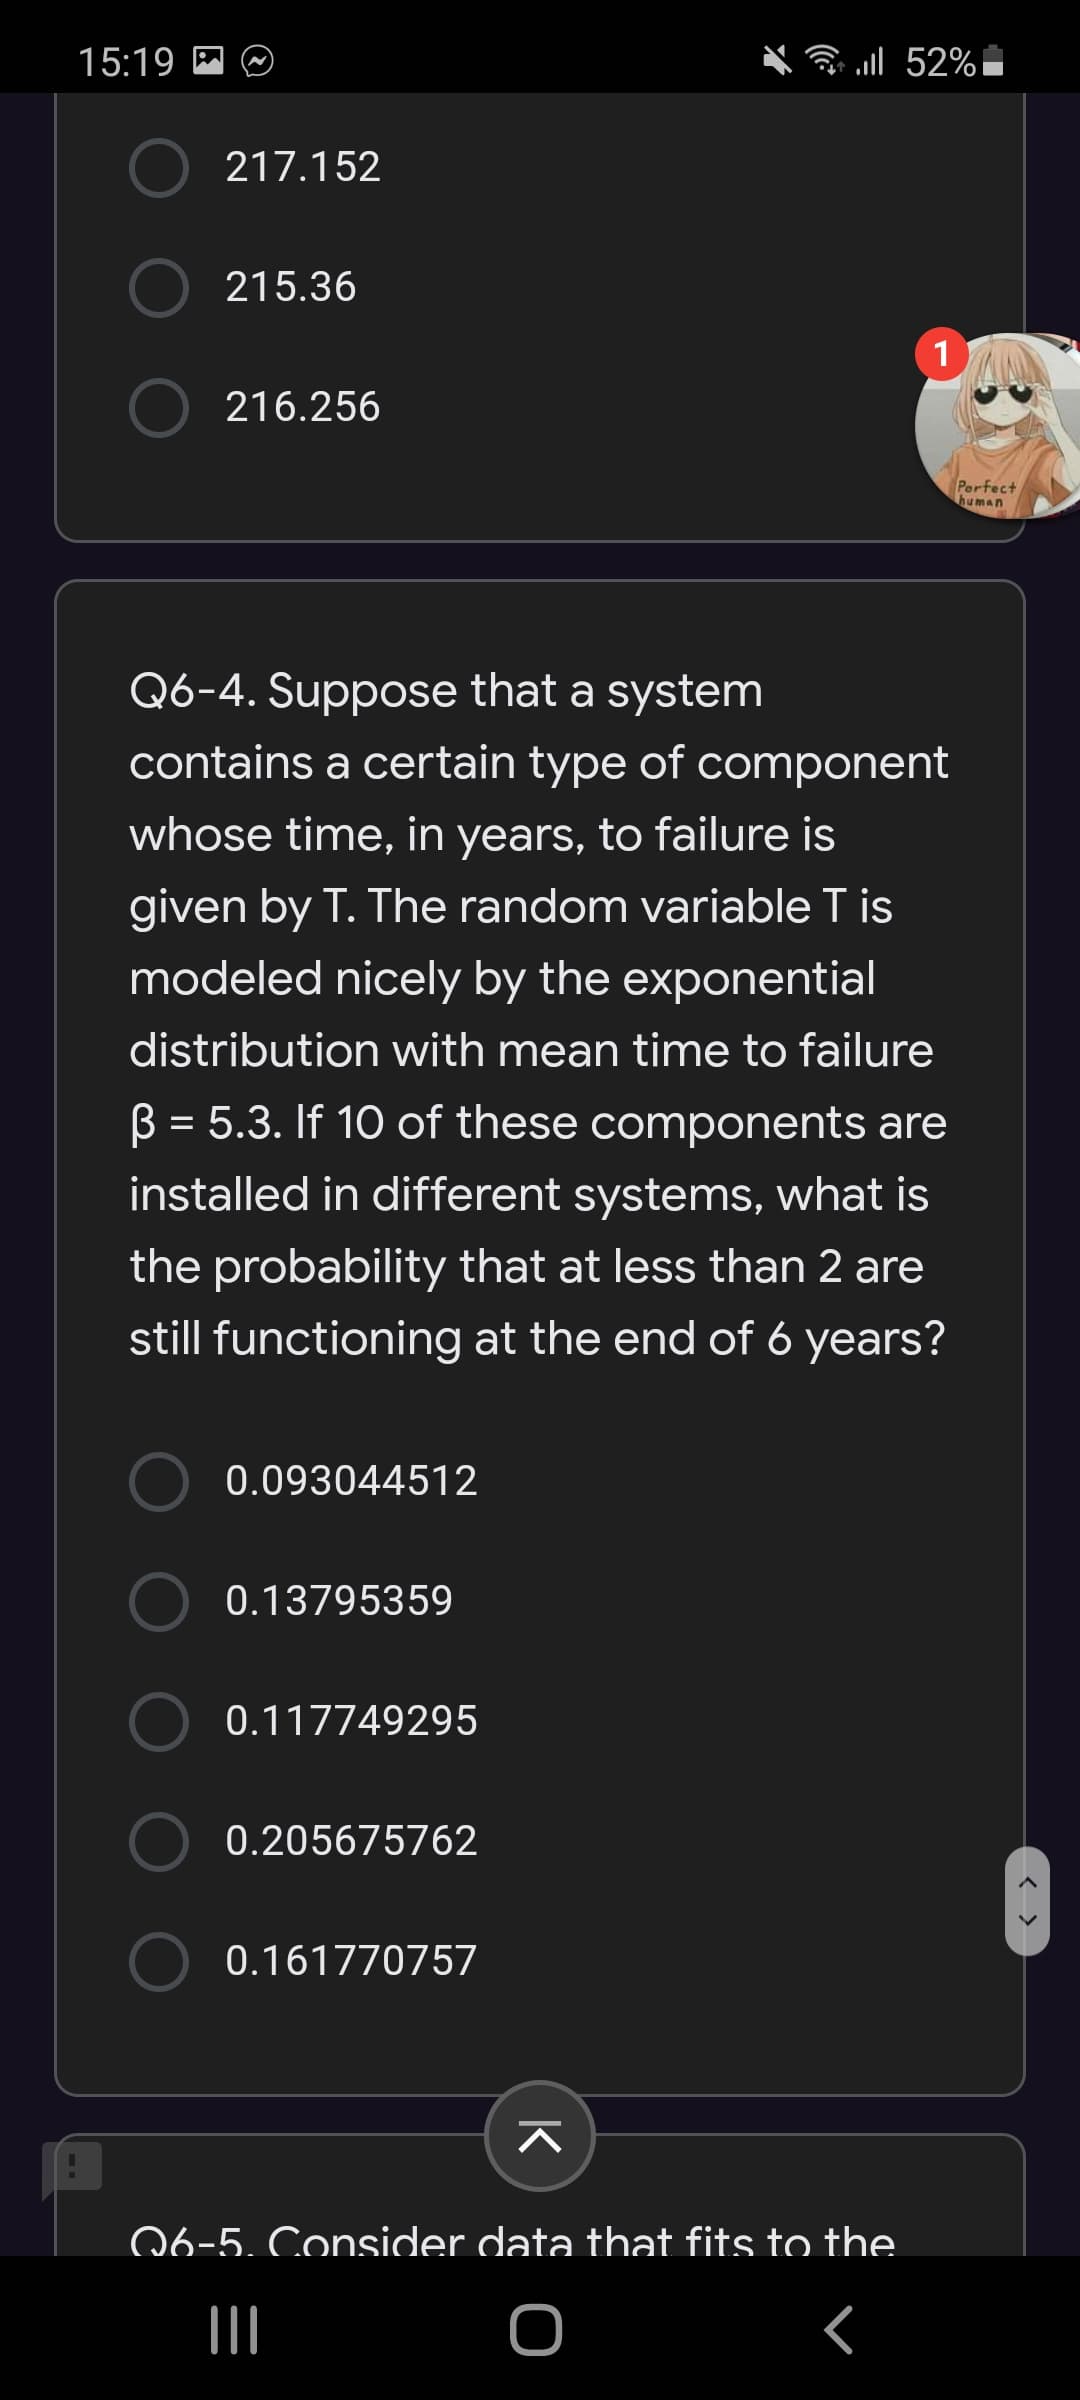 Q6-4. Suppose that a system
contains a certain type of component
whose time, in years, to failure is
given by T. The random variable T is
modeled nicely by the exponential
distribution with mean time to failure
B = 5.3. If 10 of these components are
installed in different systems, what is
the probability that at less than 2 are
still functioning at the end of 6 years?
0.093044512
0.13795359
0.117749295
0.205675762
0.161770757
